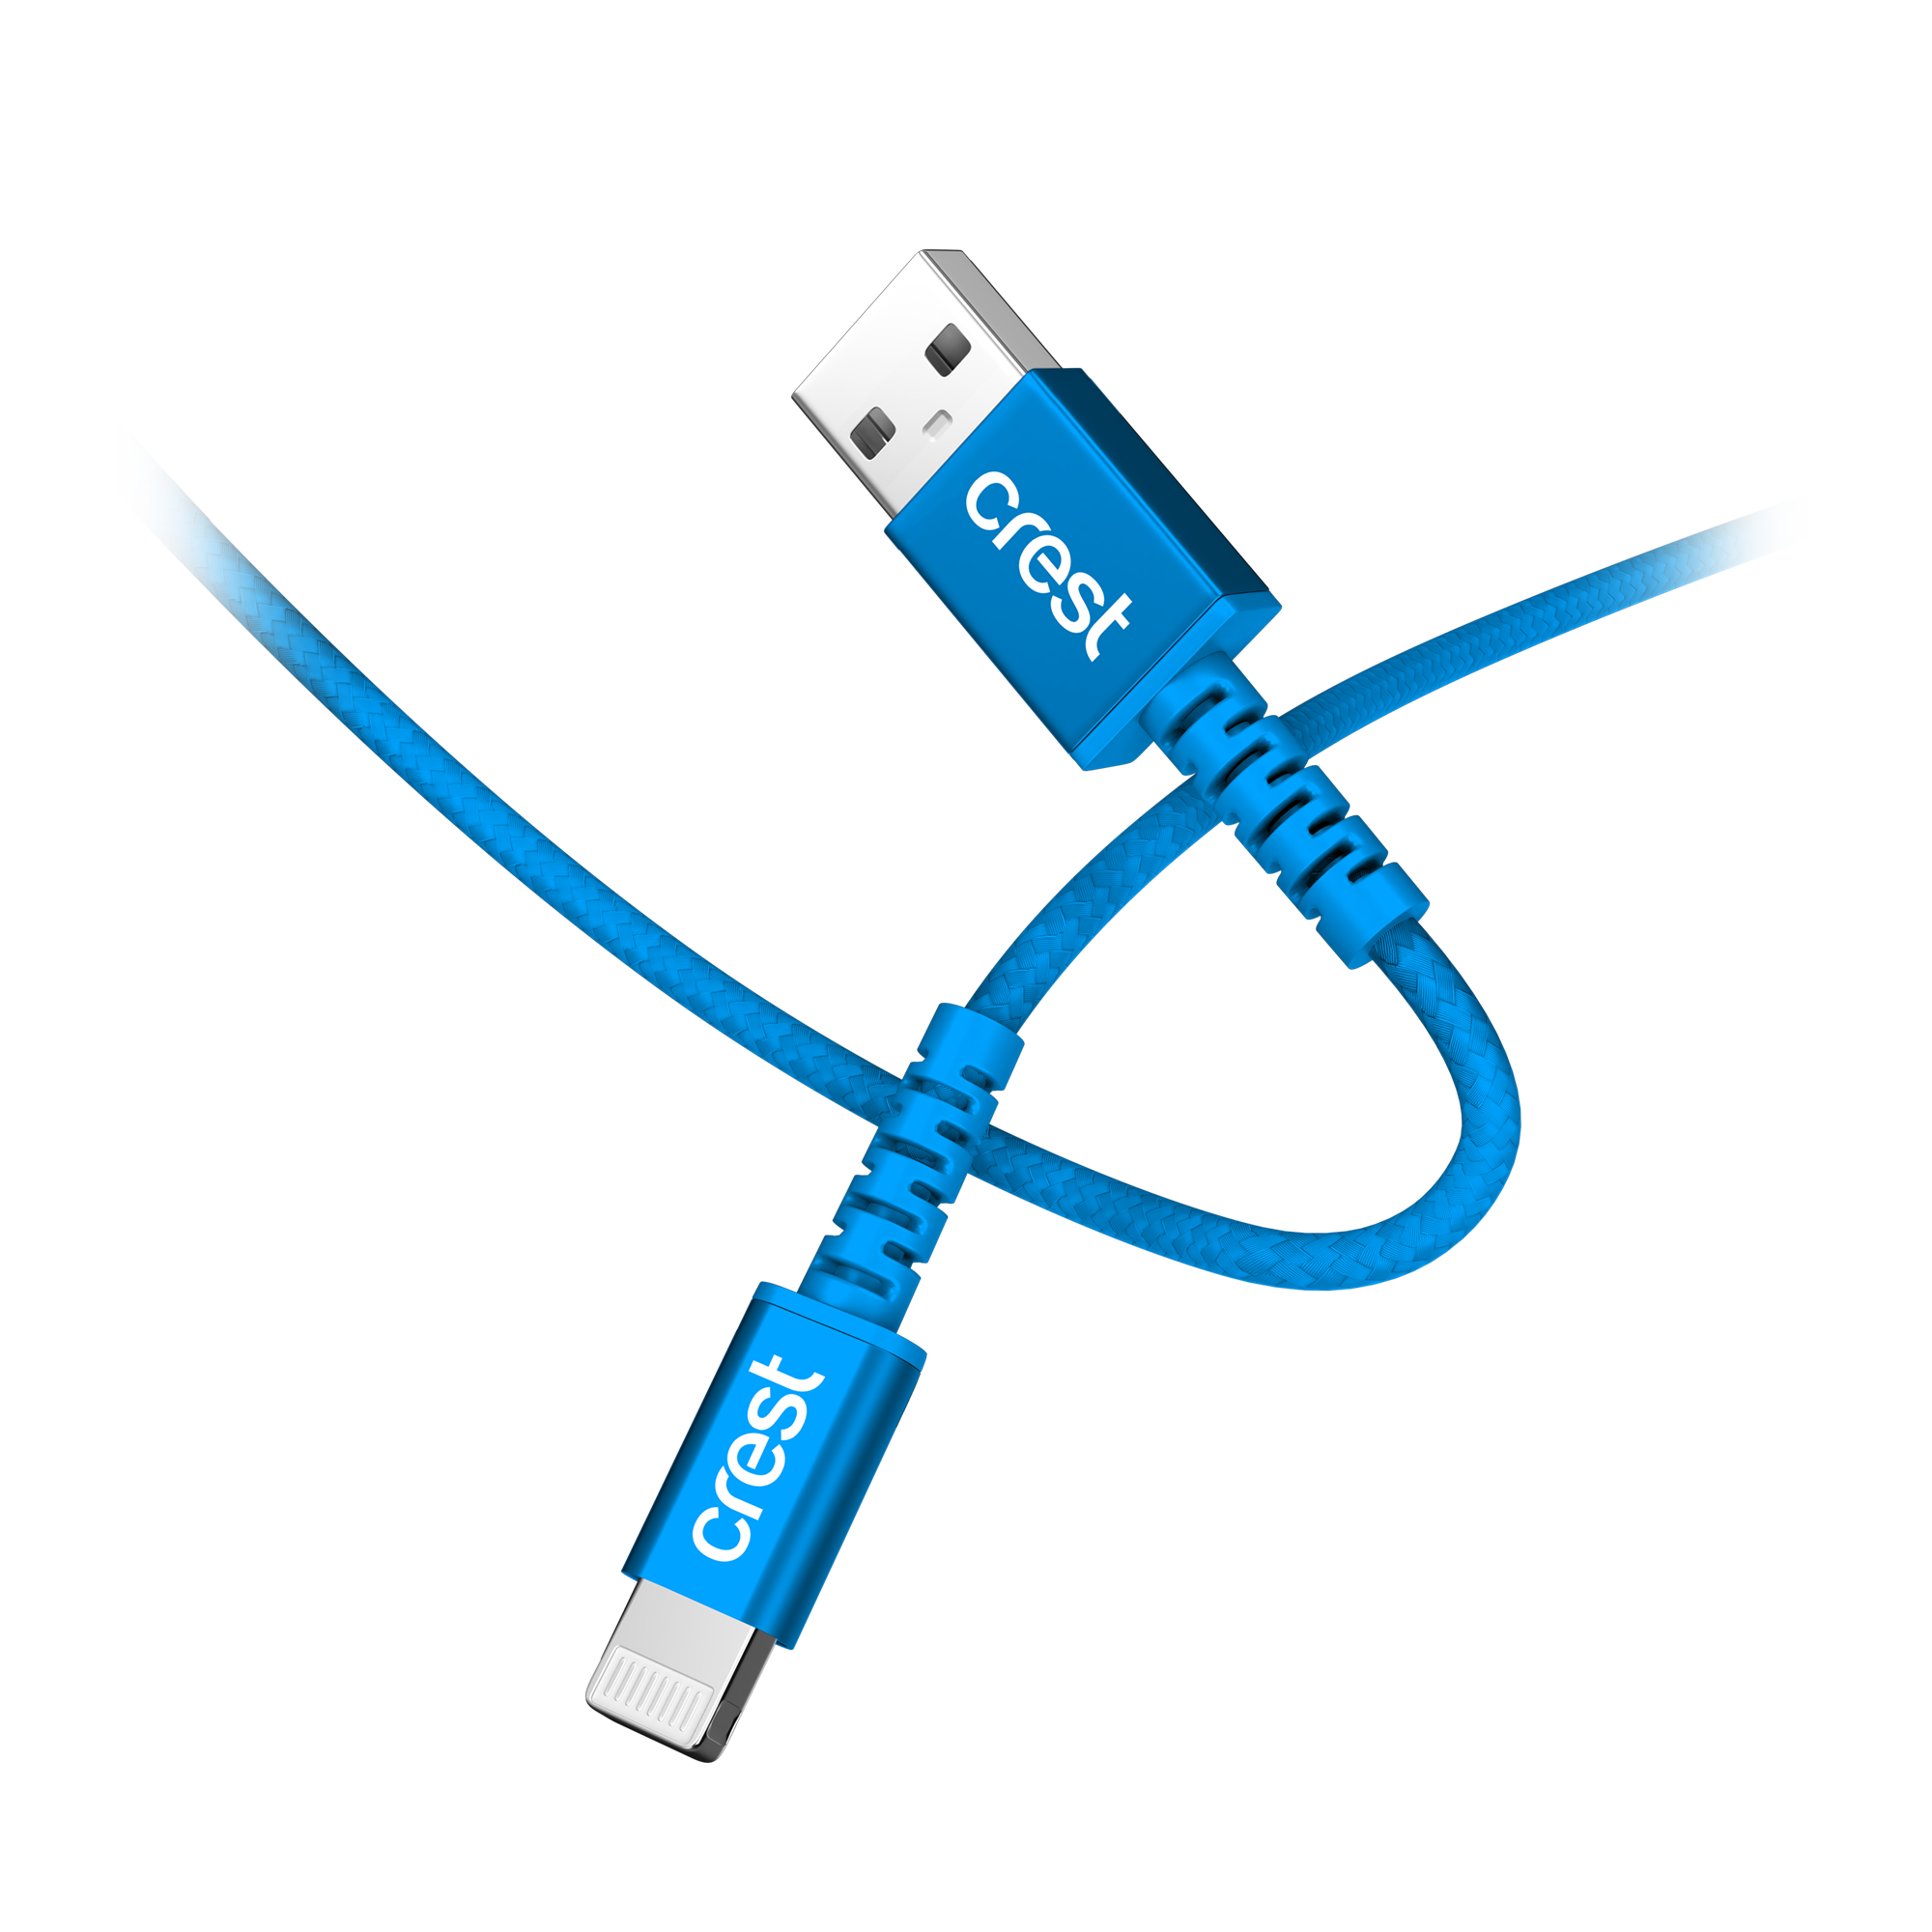 Lightning to USB-A Braided Cable 1.5M - Blue